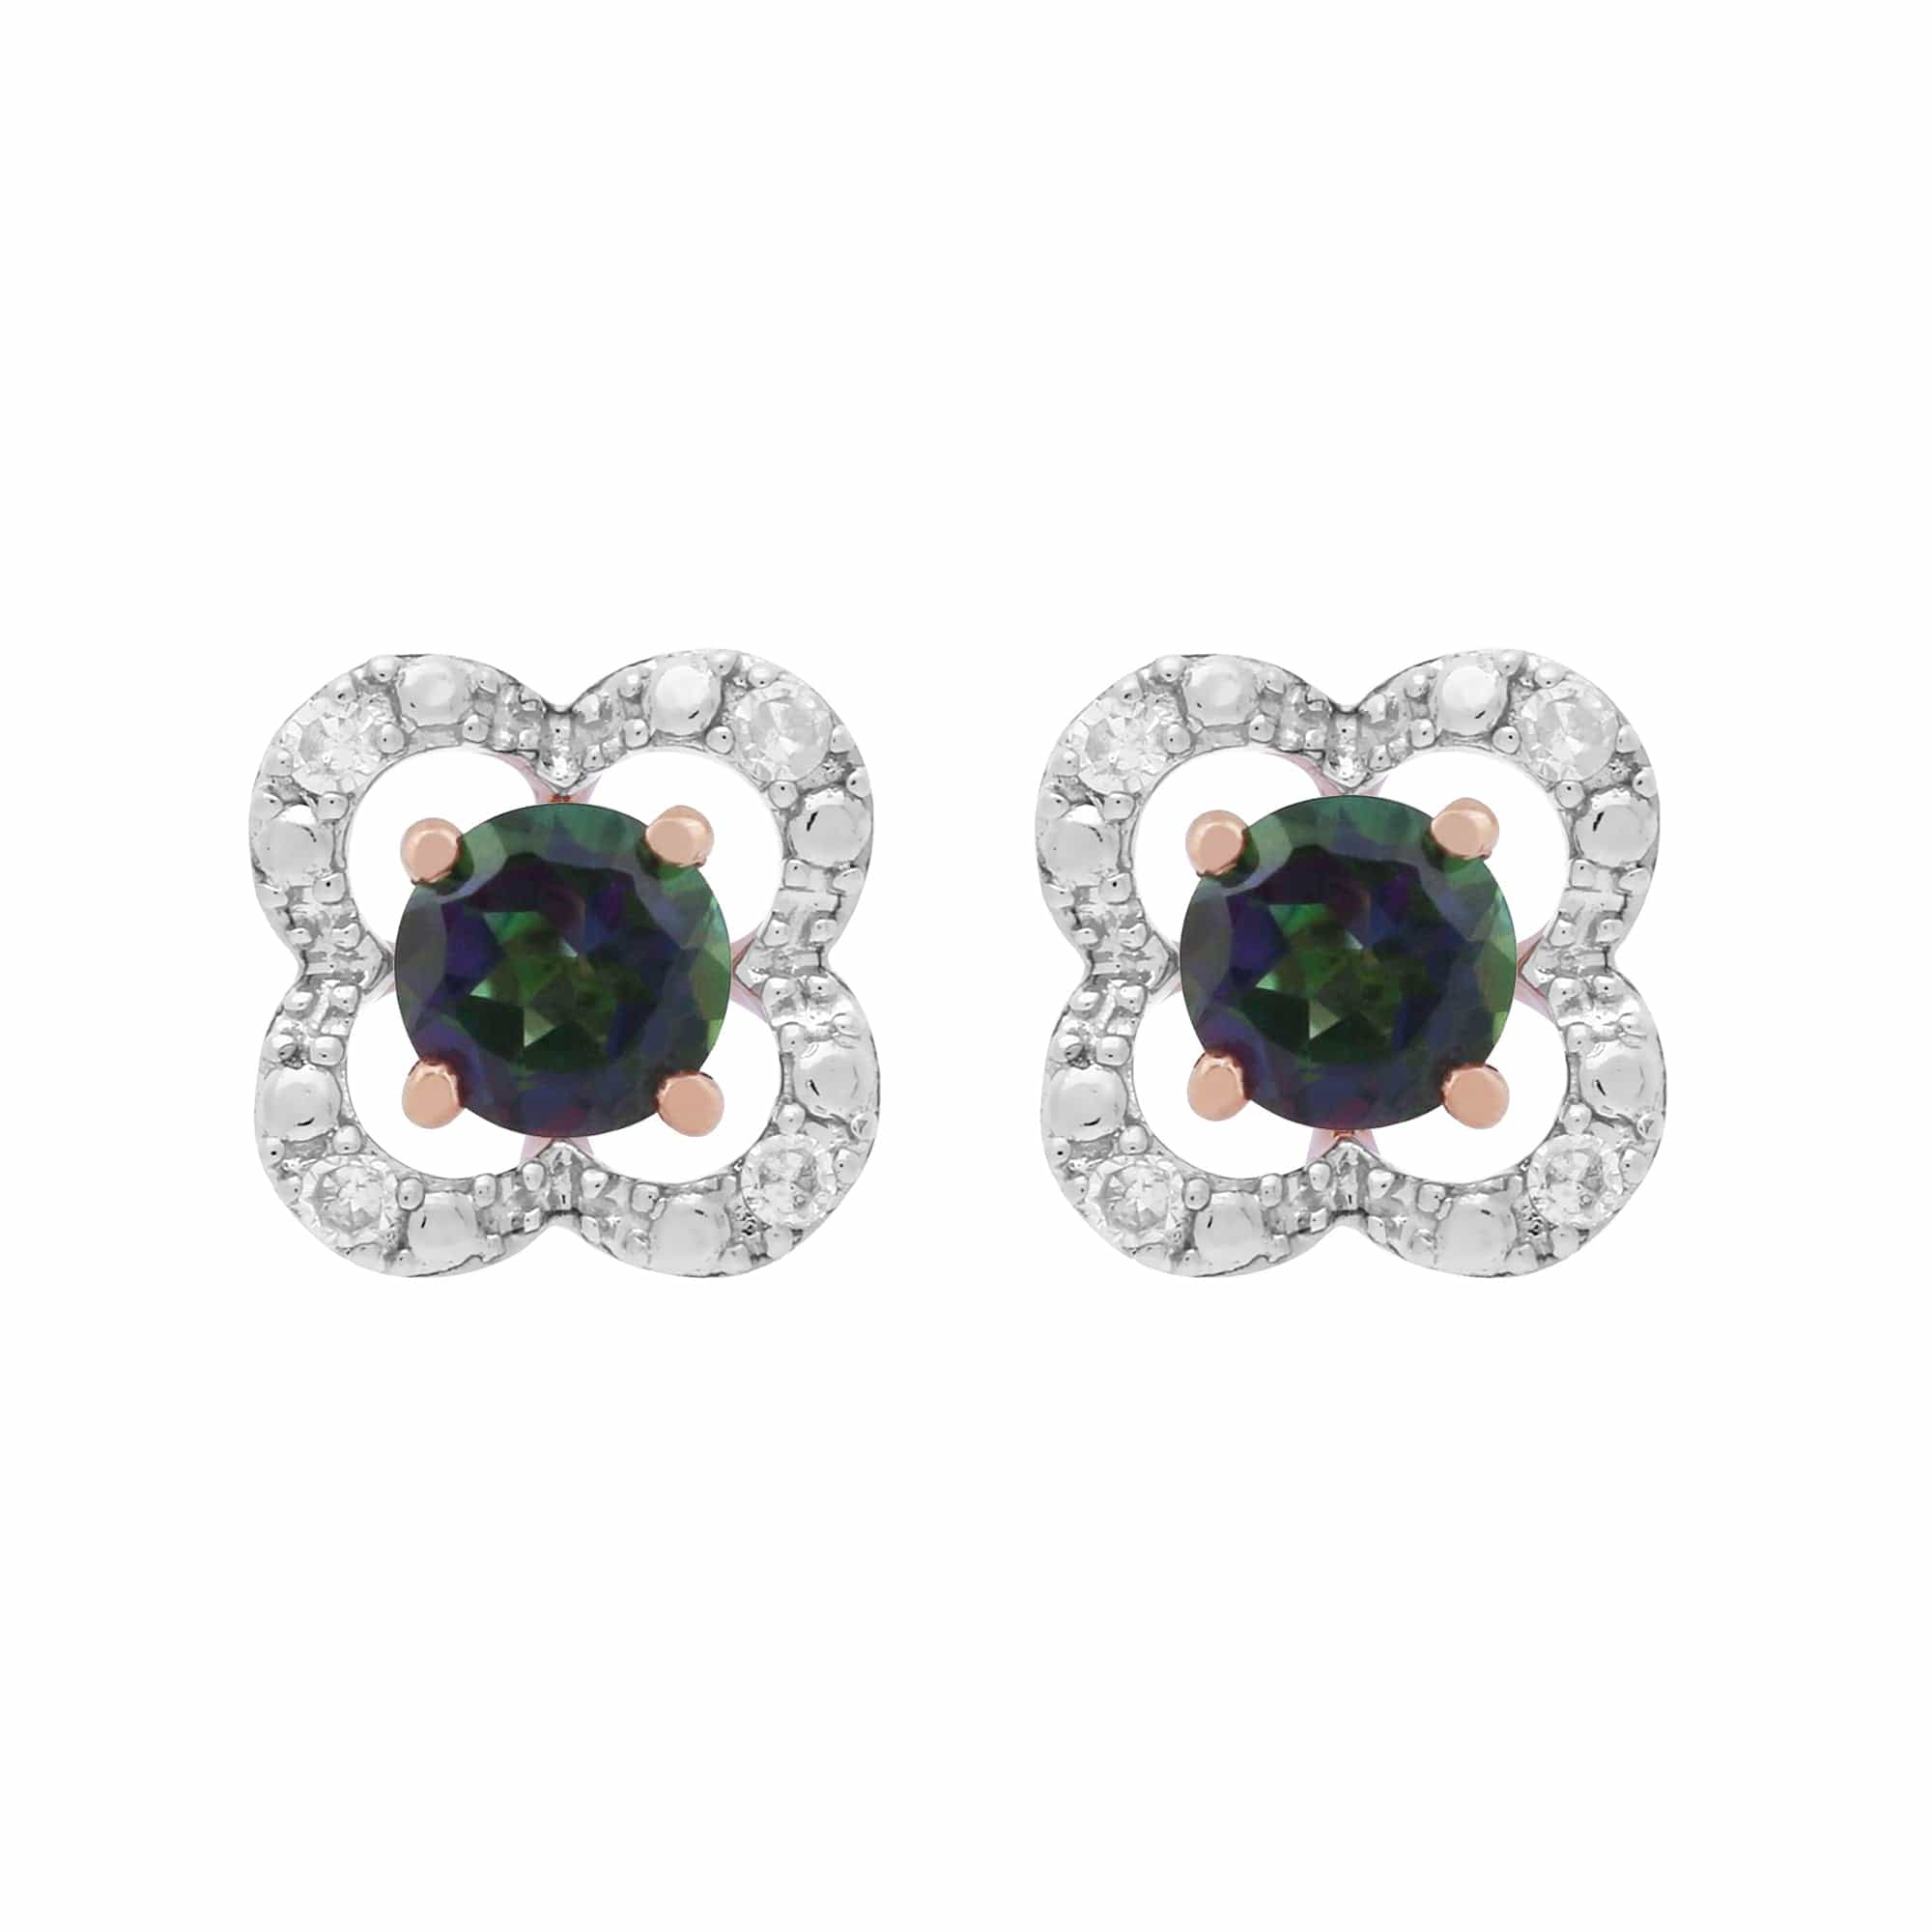 183E4316029-191E0373019 Classic Mystic Topaz Stud Earrings with Detachable Diamond Flower Jacket in 9ct Rose Gold 1